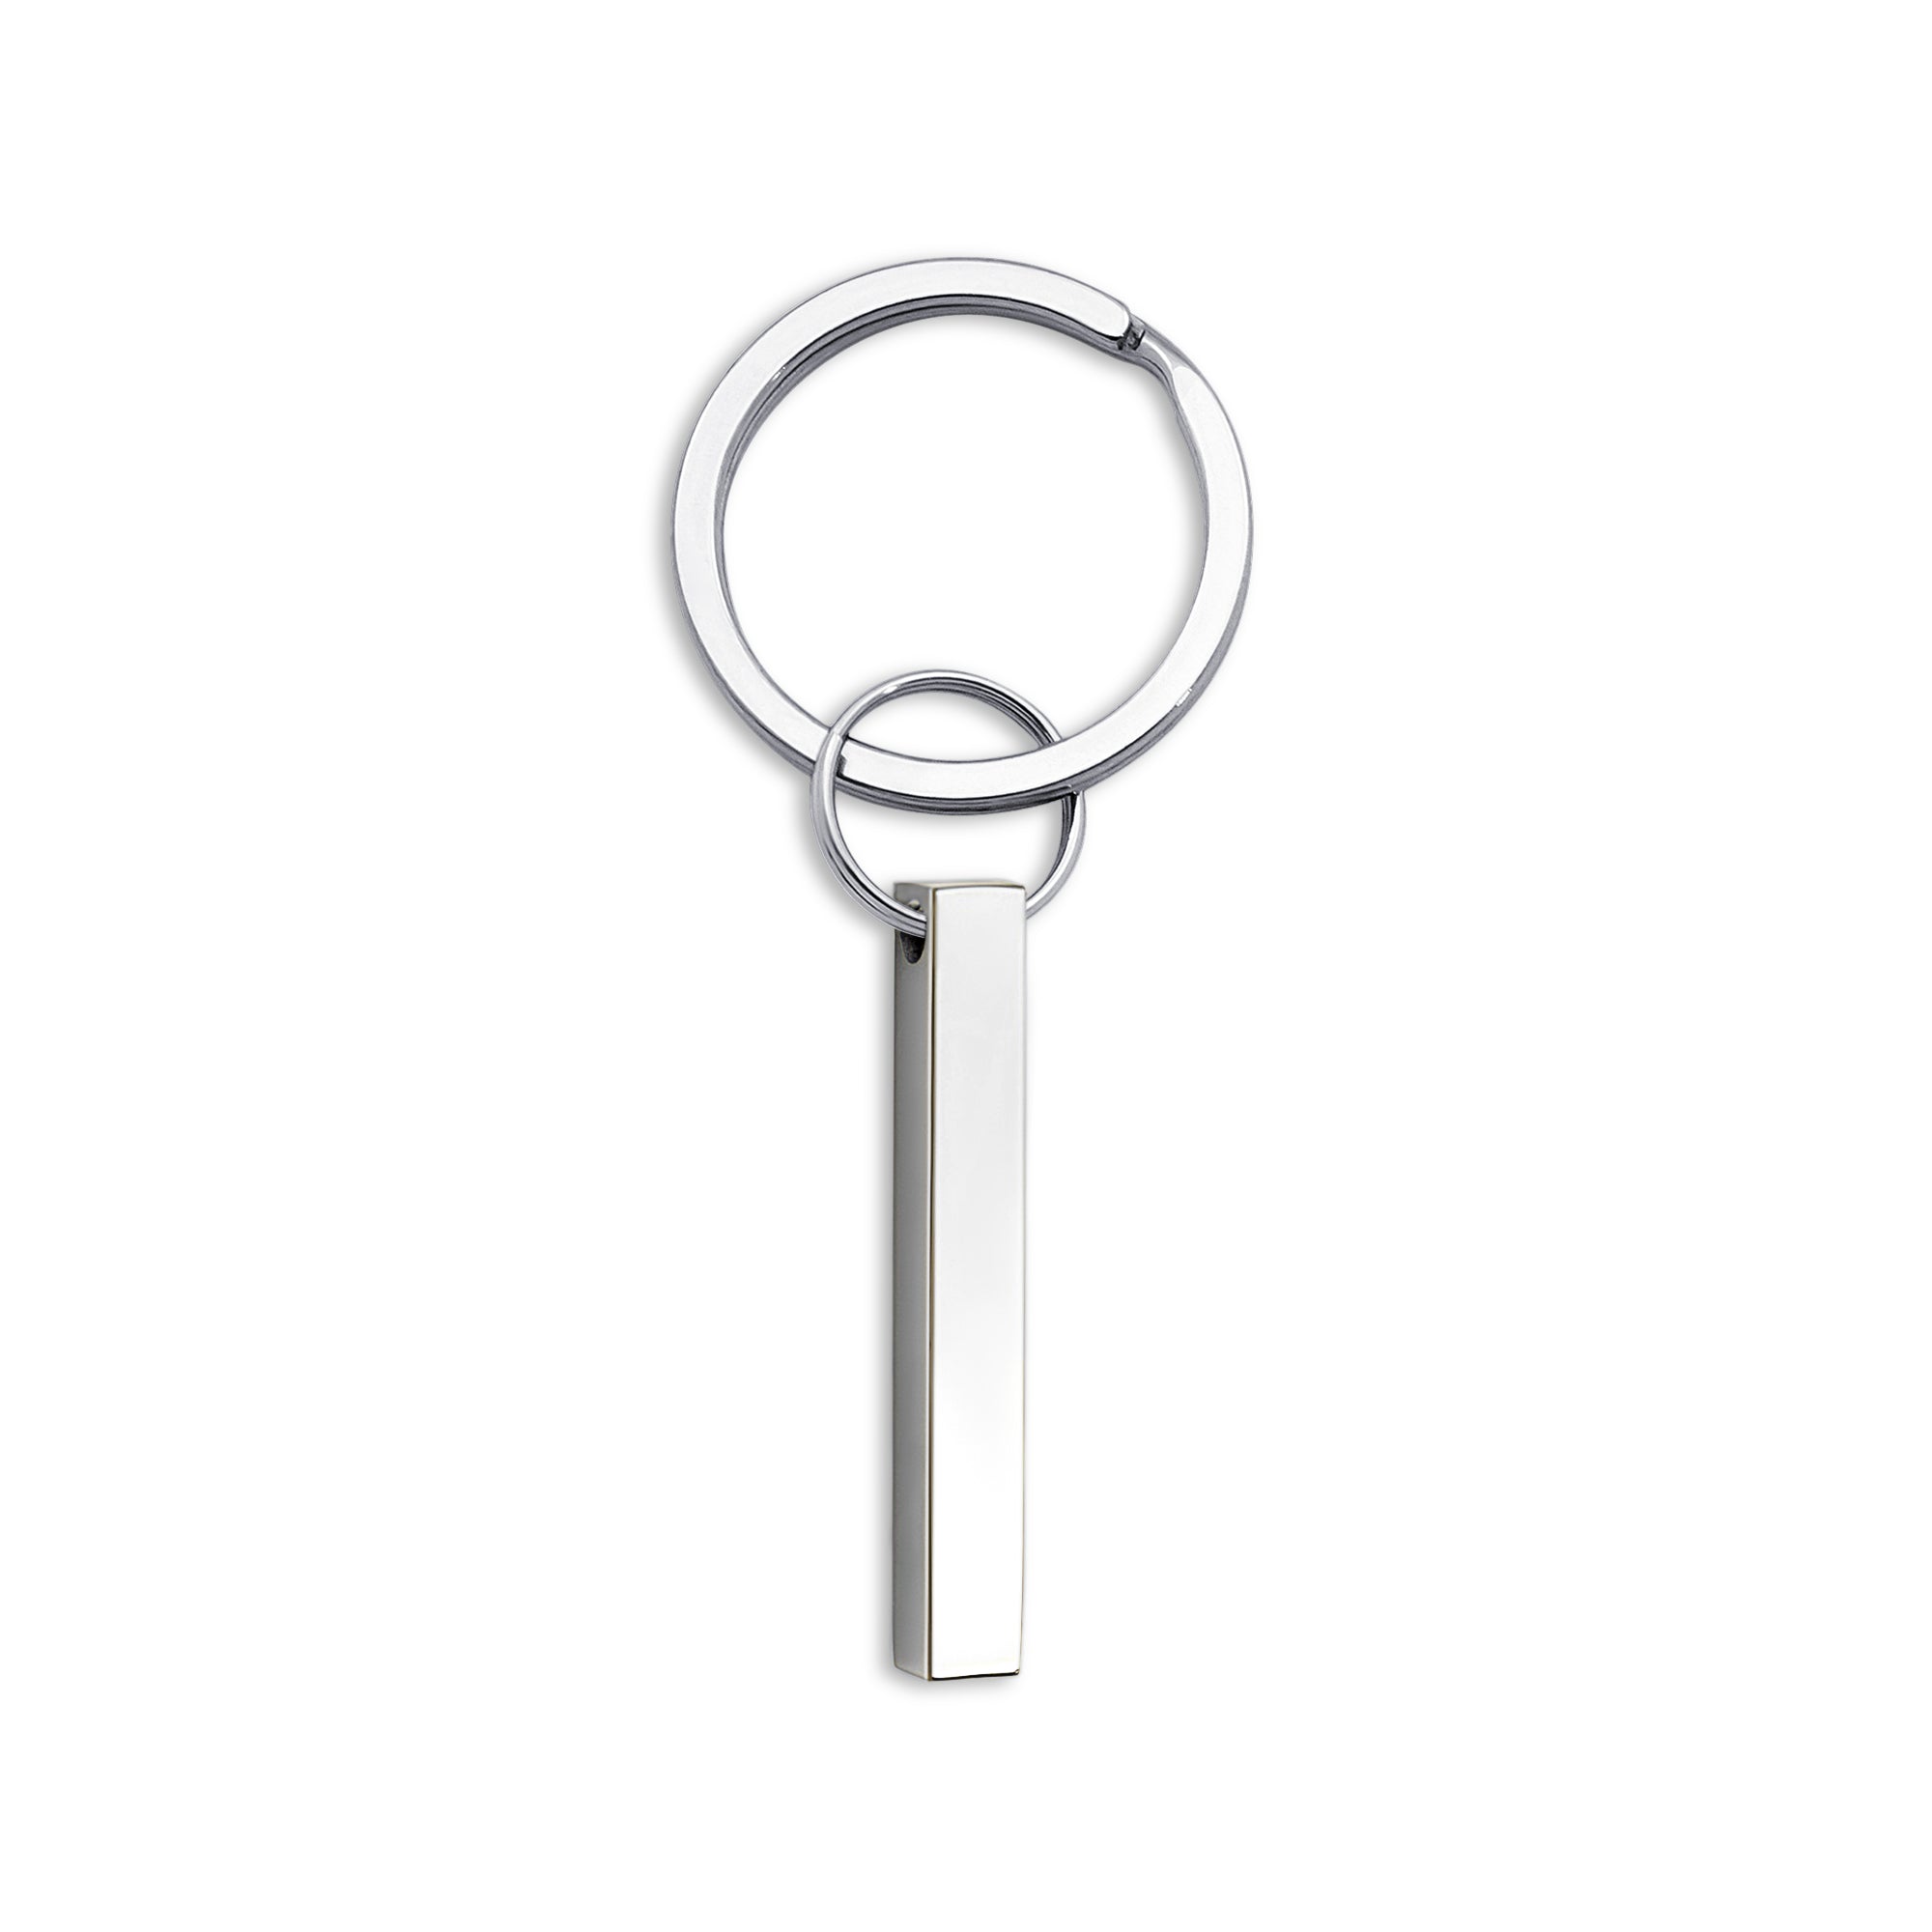 Four-Sided Bar Key Chain - Sterling Silver